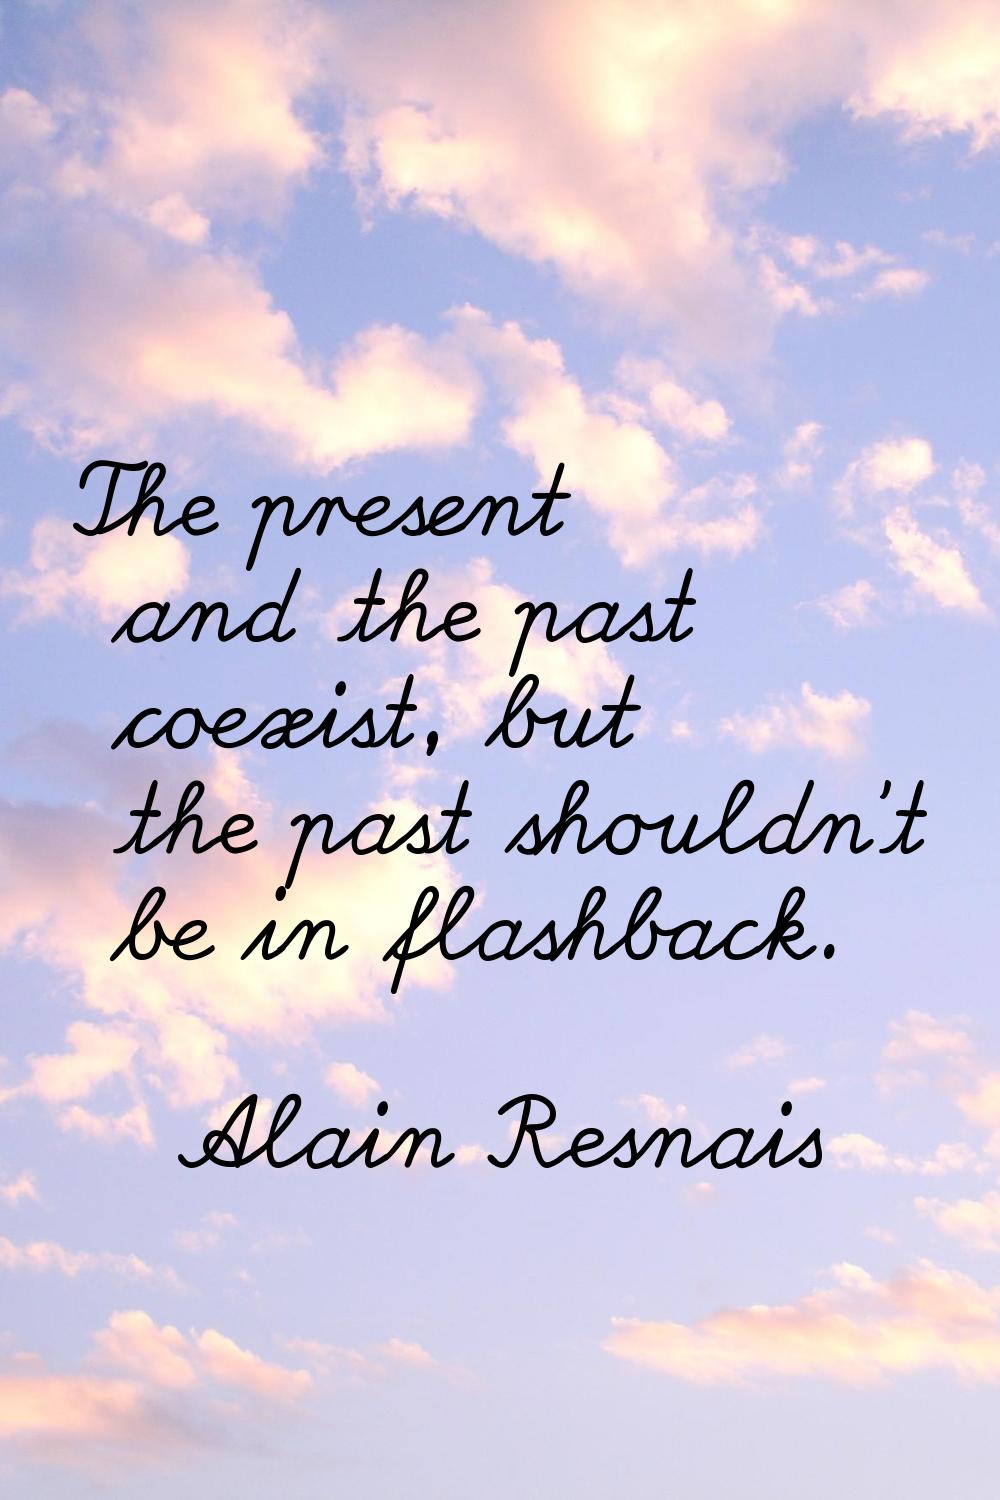 The present and the past coexist, but the past shouldn't be in flashback.